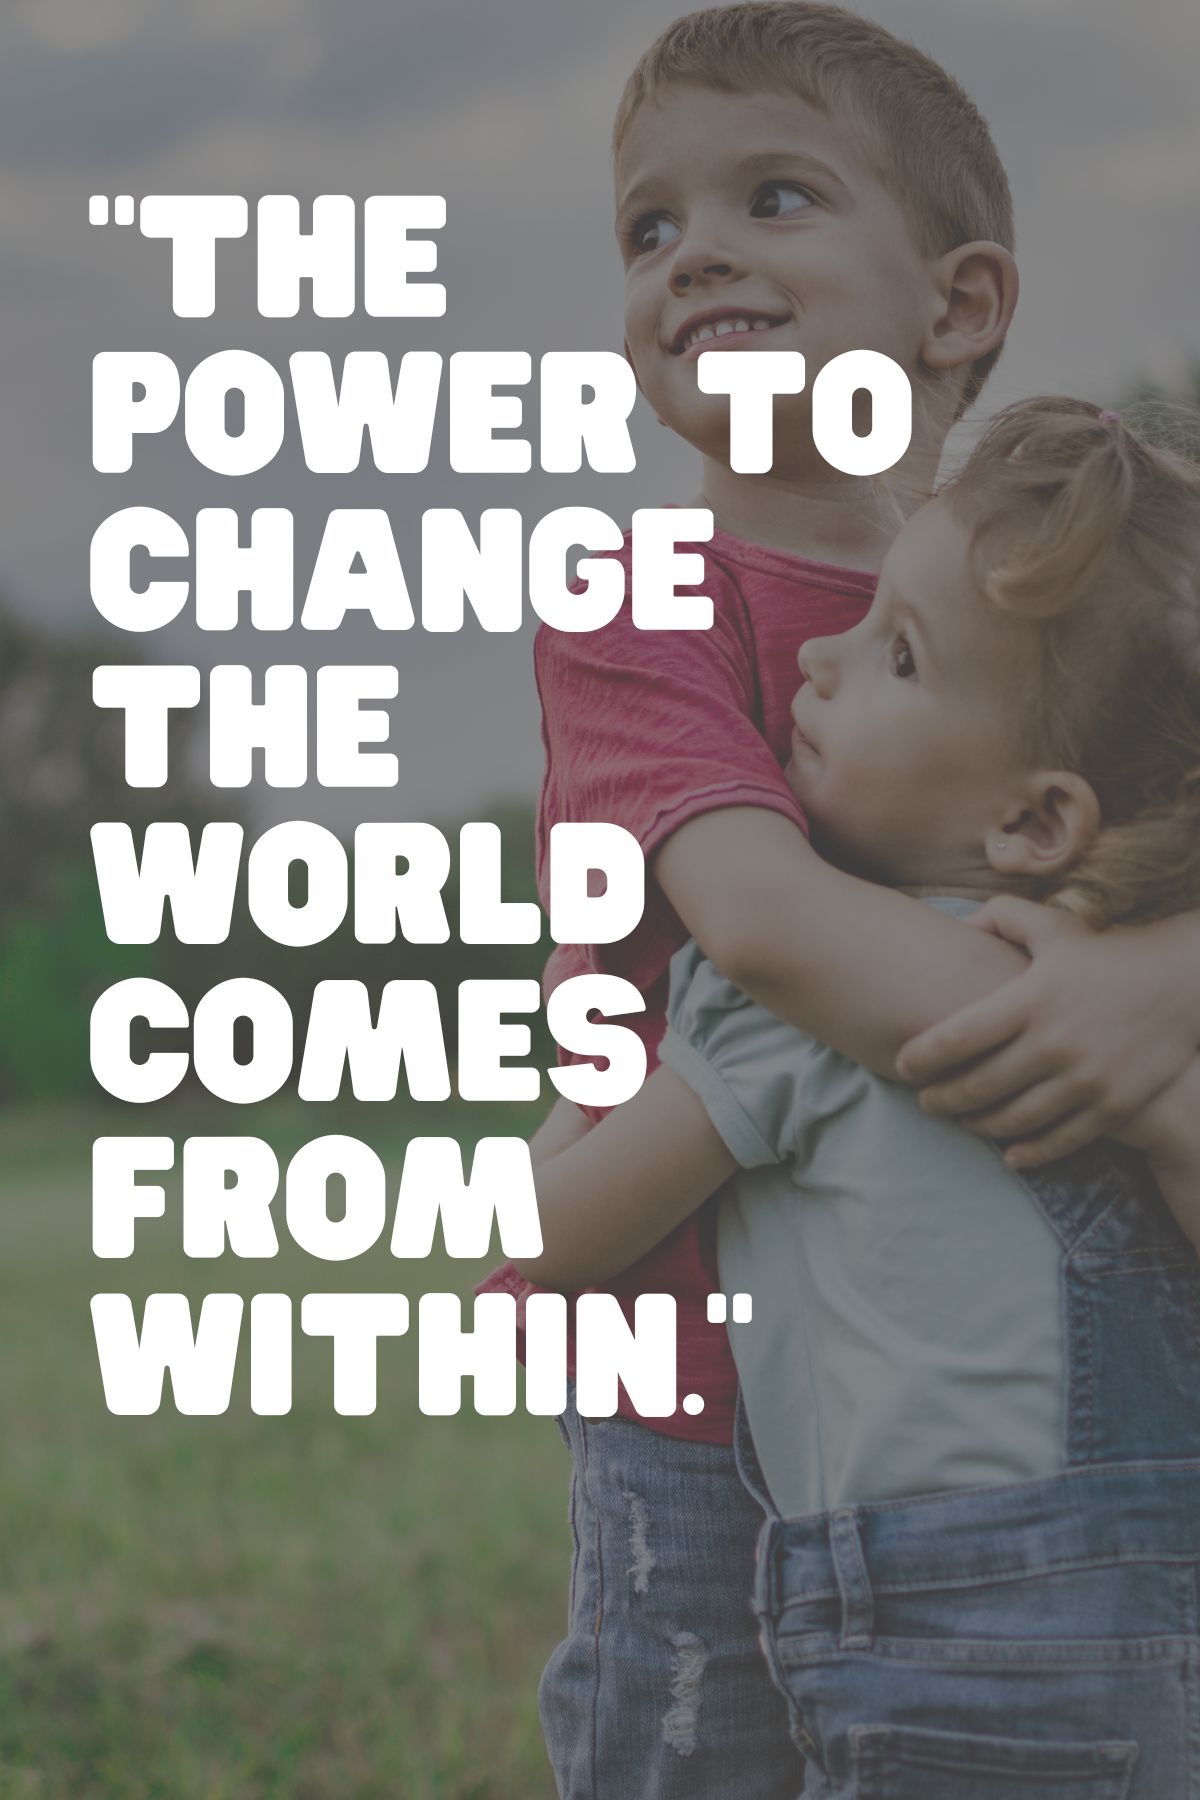 "The power to change the world comes from within." - Unknown